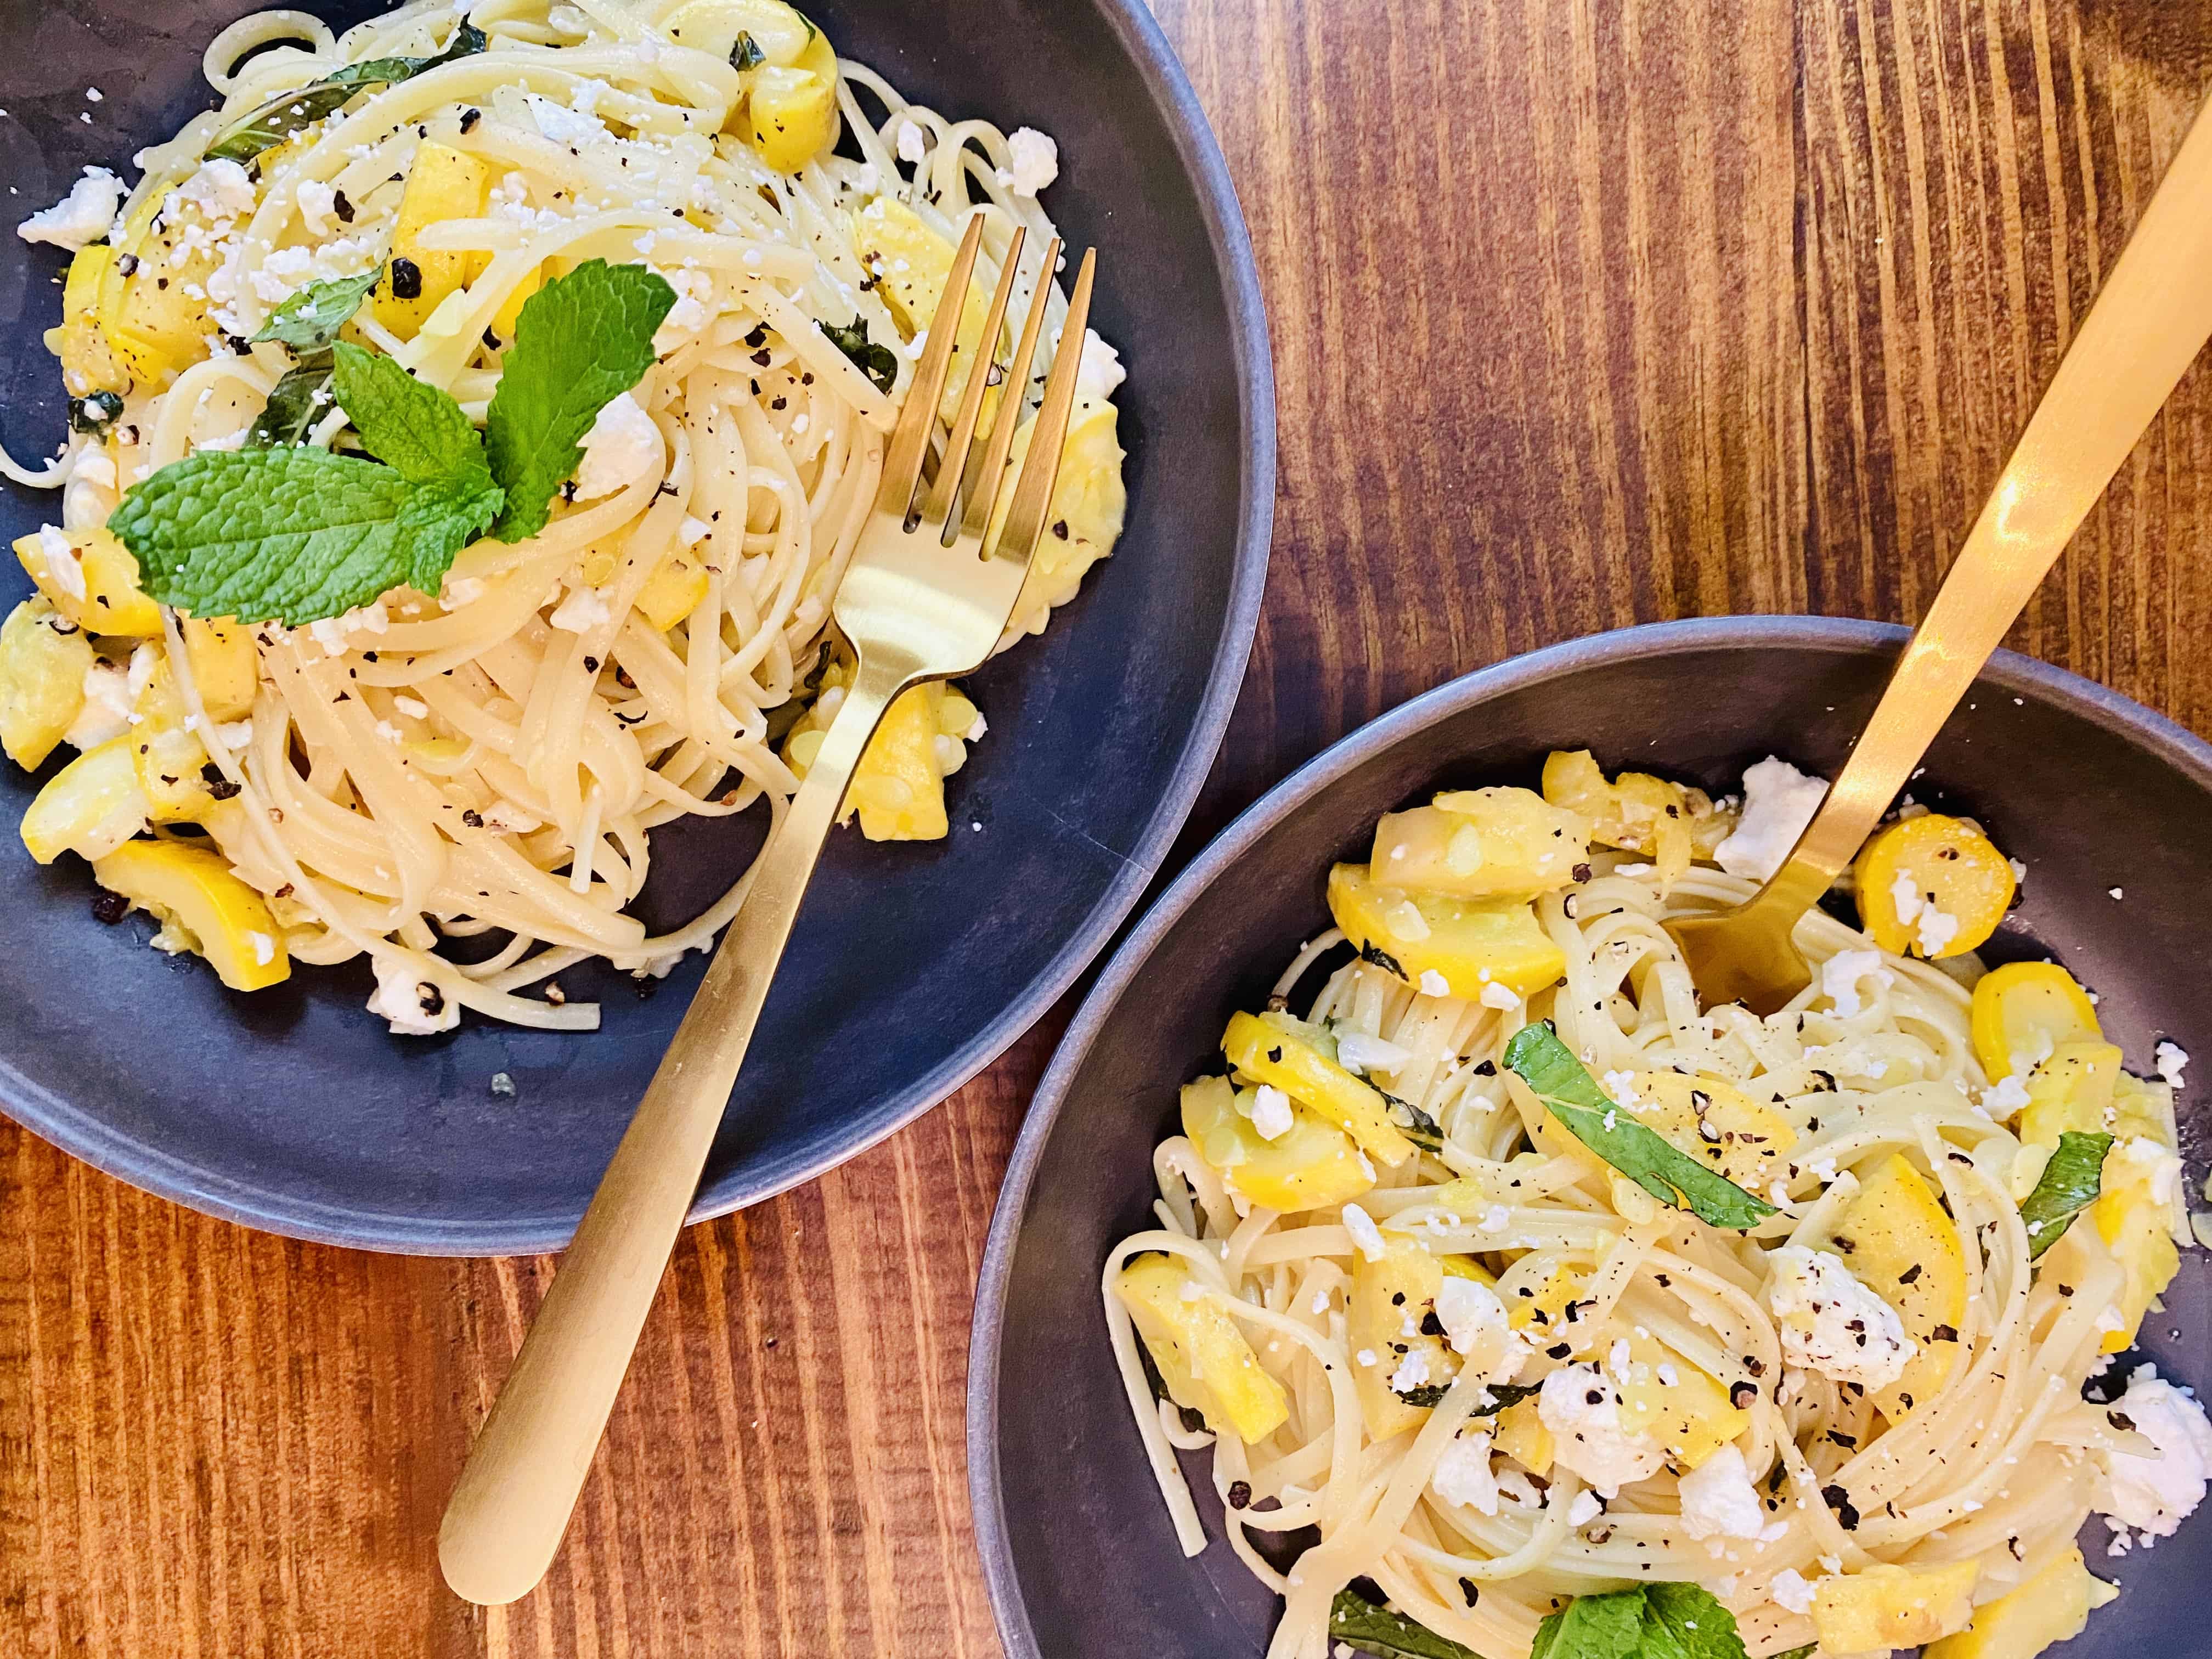 Two beautiful bowls of this 5 ingredient summer pasta waiting on our dinner table.